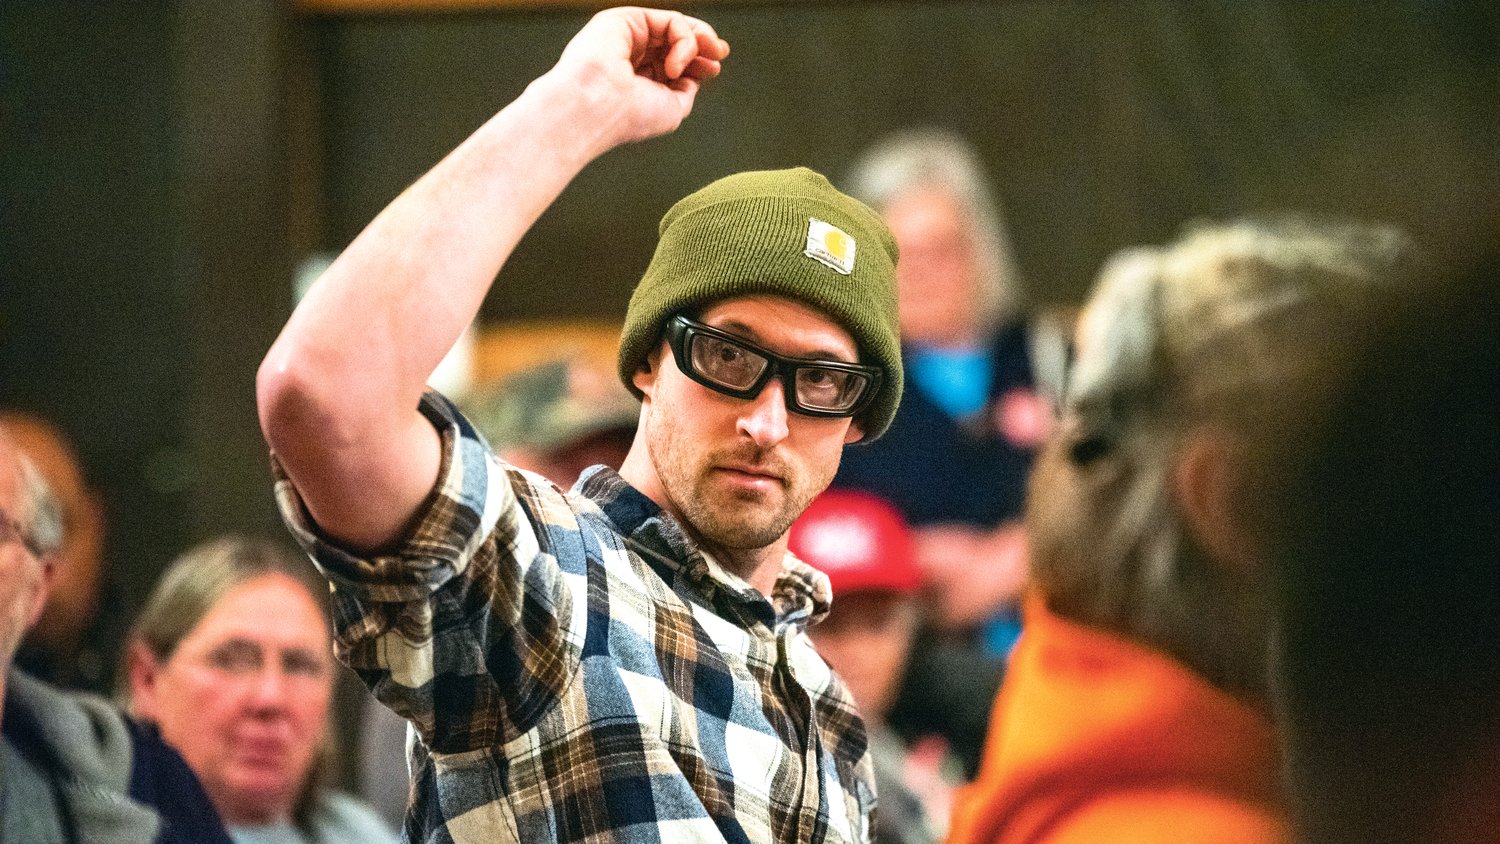 A man from Tacoma raises his hand at a Wednesday night Joe Kent town hall in Onalaska. He refused to reveal his name to The Chronicle but confirmed he was at the event in support of Nick Fuentes, a rising far-right figure who Kent recently denounced due to Fuentes’s anti-semitism, Kent said Wednesday.